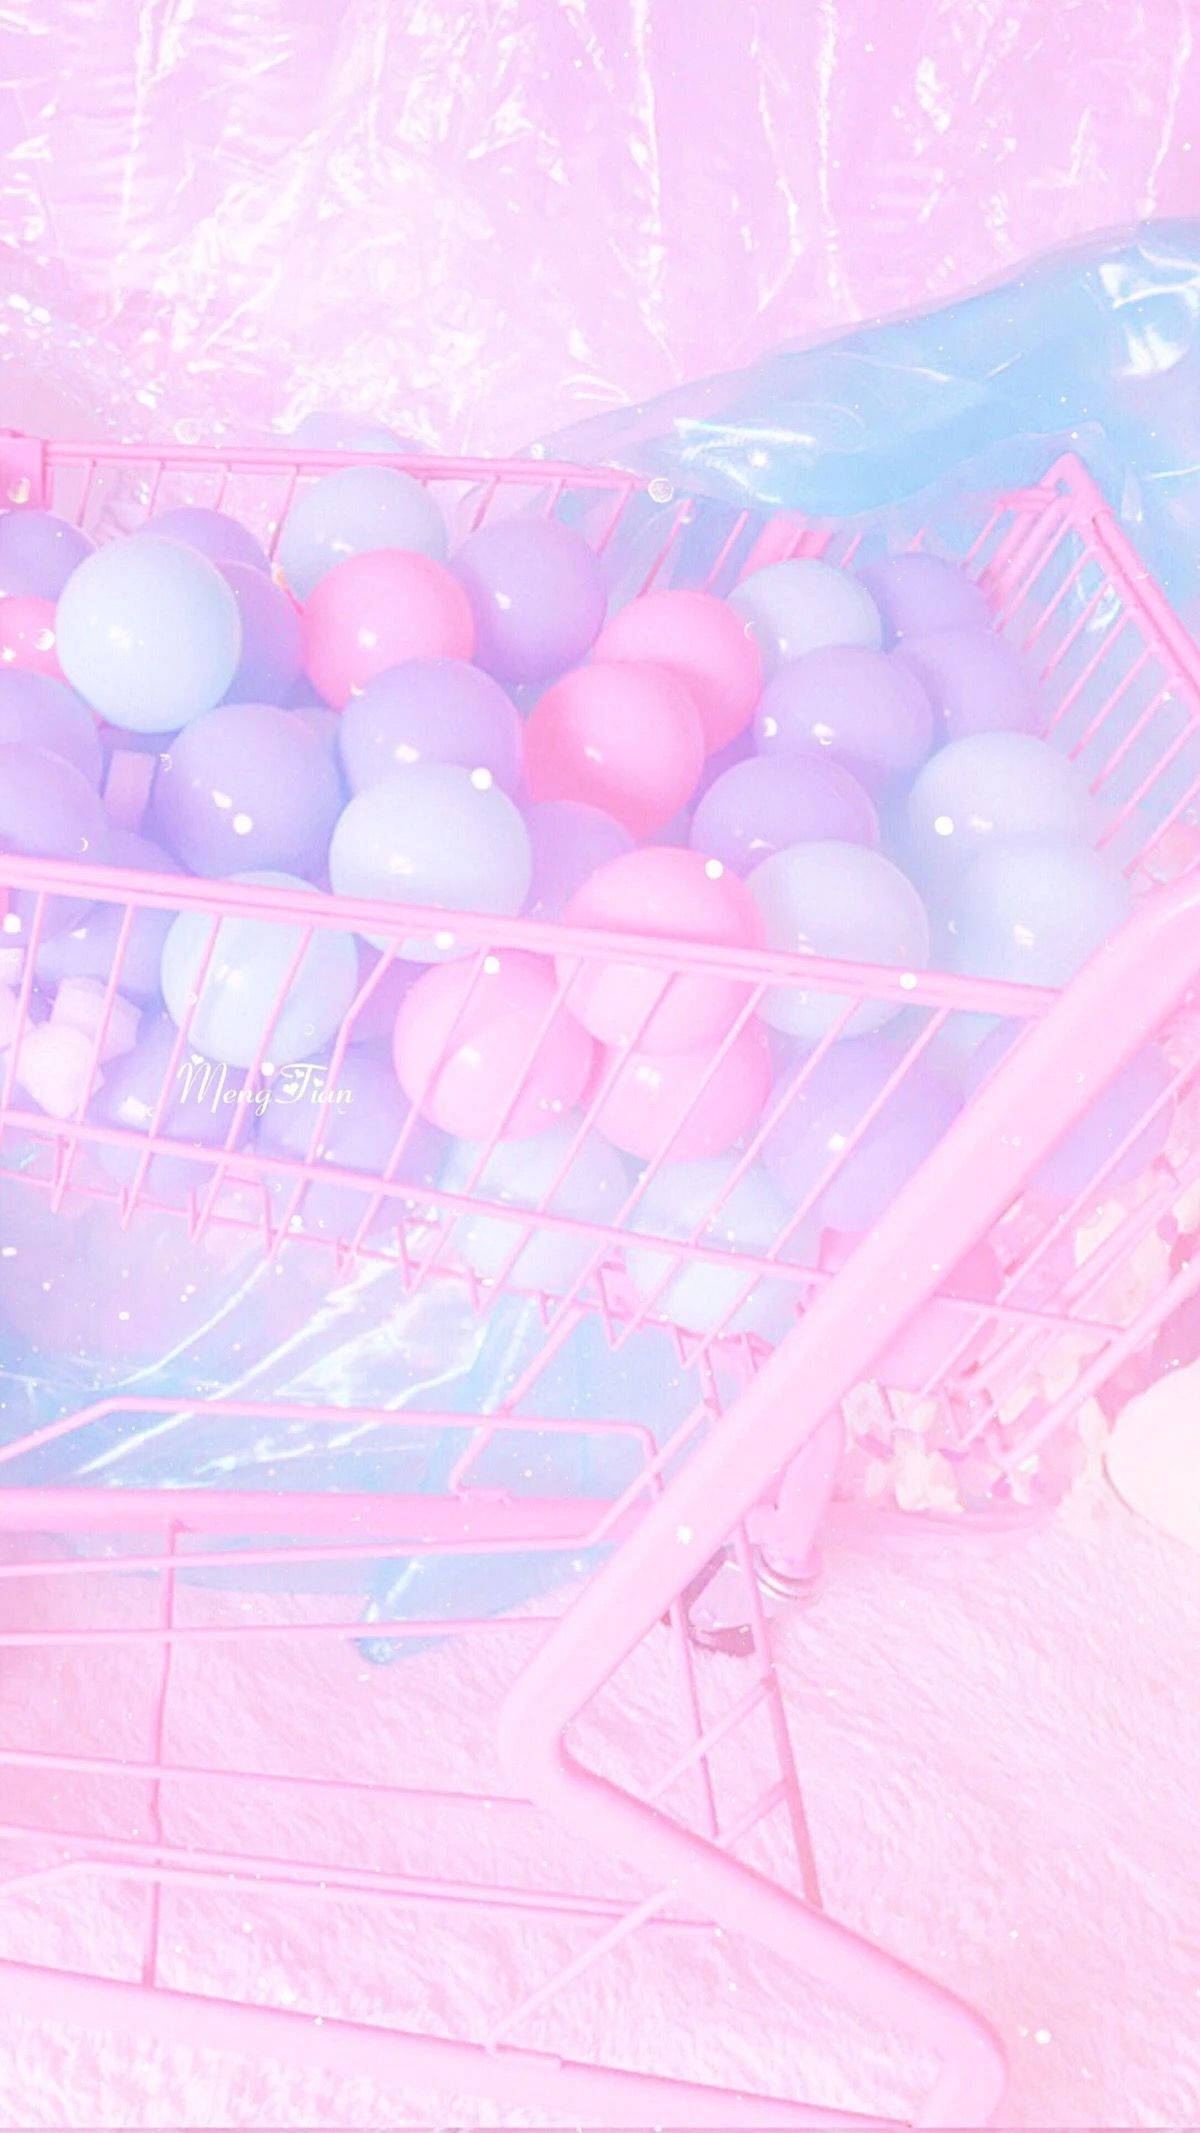 Cute Pink Aesthetic Balloons On Cart Wallpaper